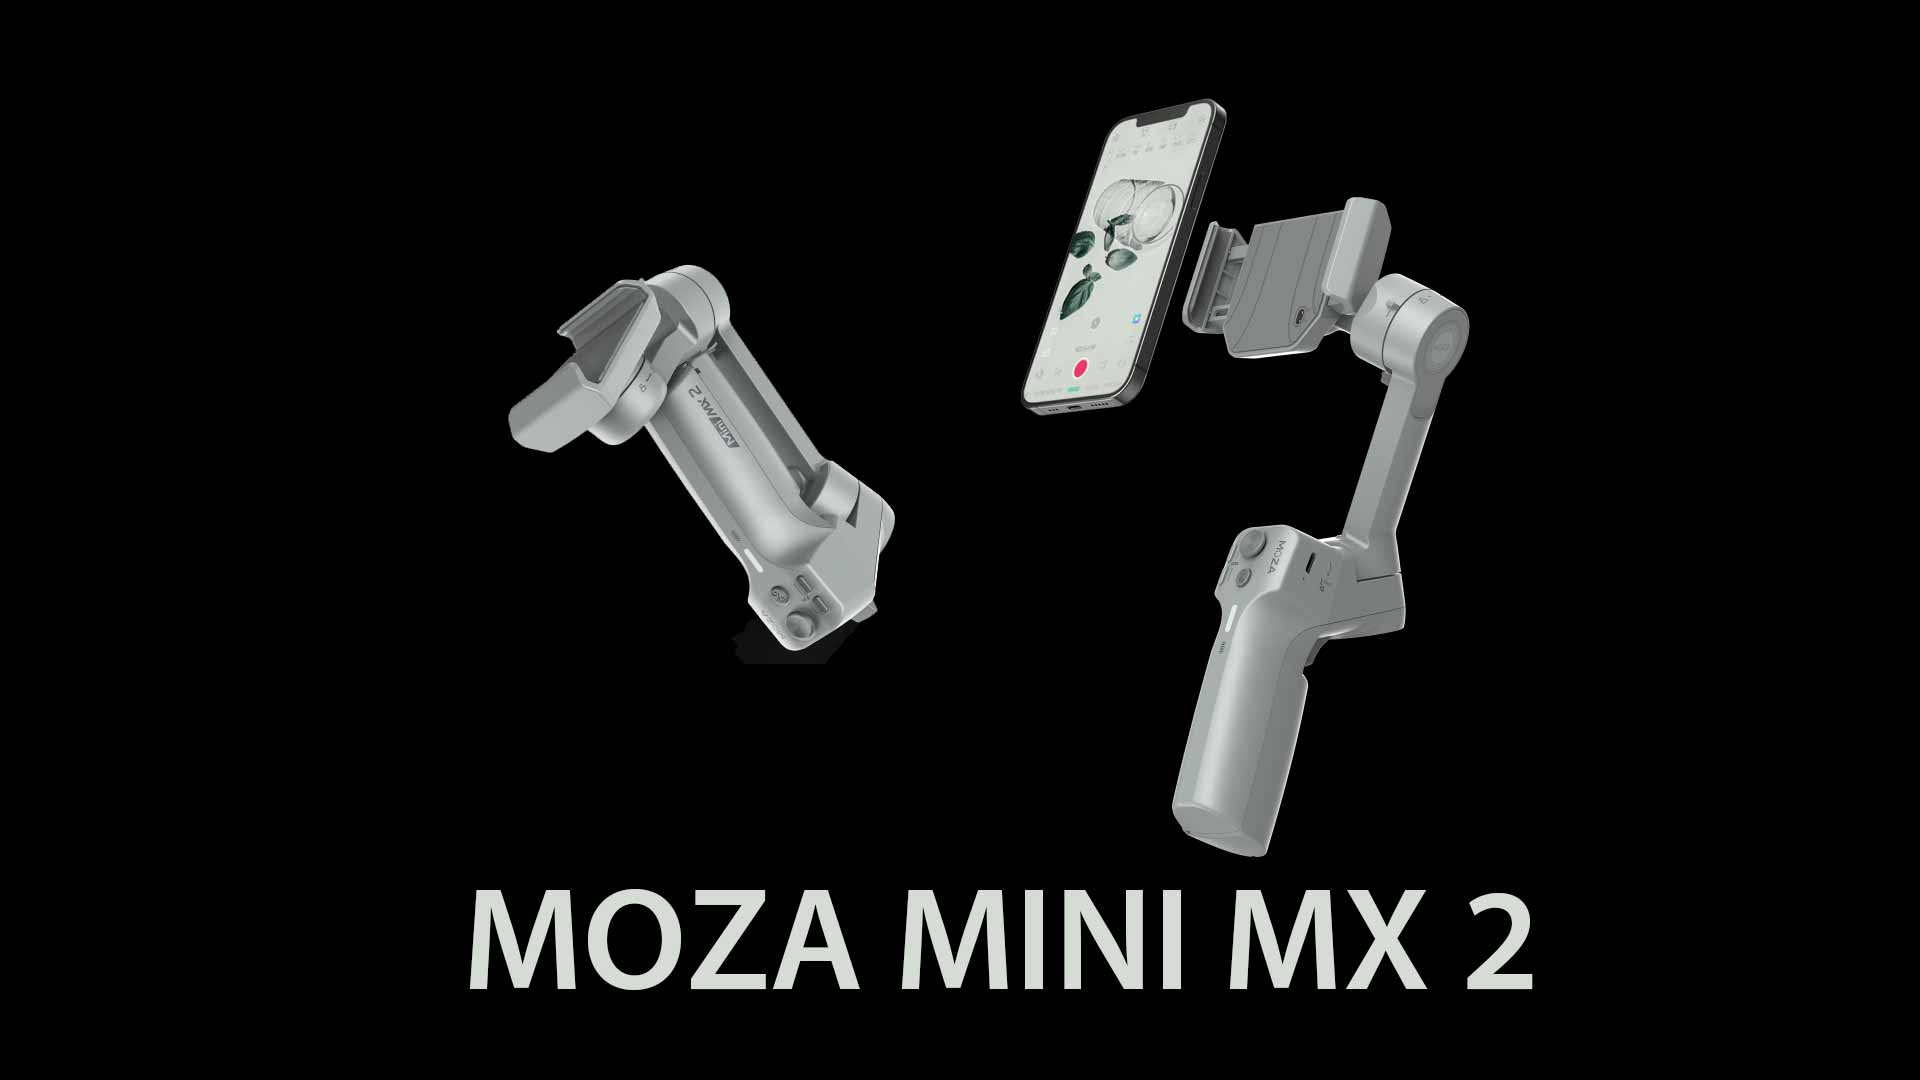 MOZA Mini MX2 Gimbal is Coming to Change the Mobile Filmmaking Industry